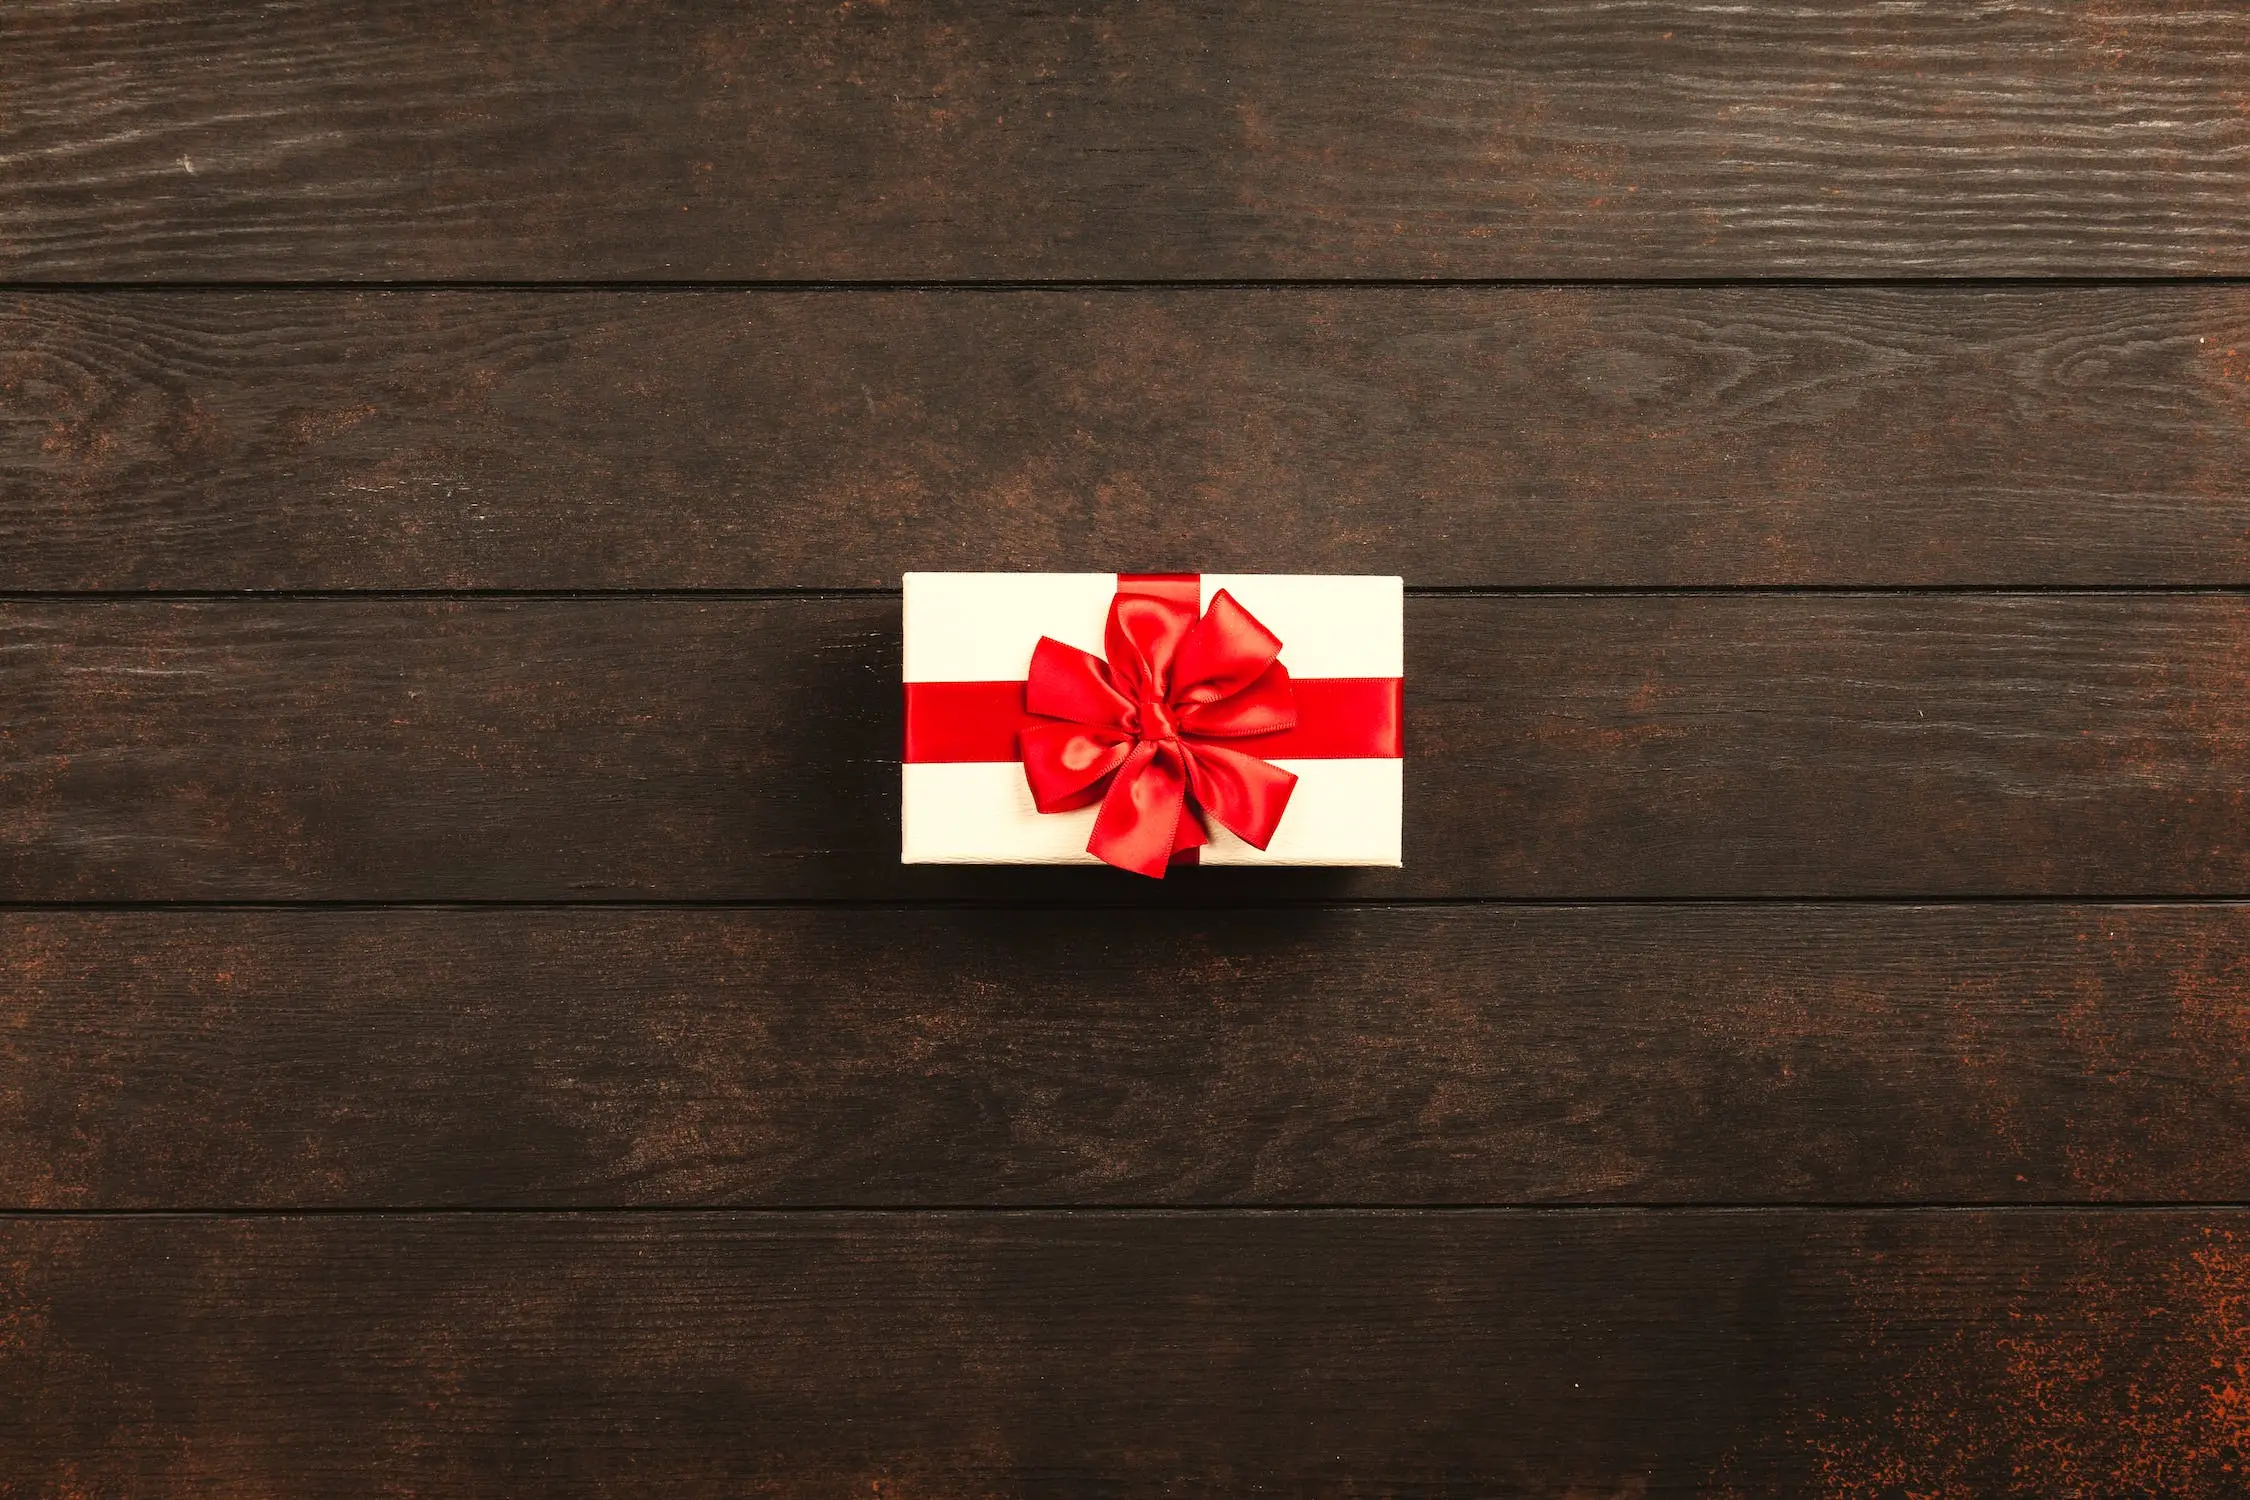 Blog post summary: How to Properly Recognize Gift Card Revenue